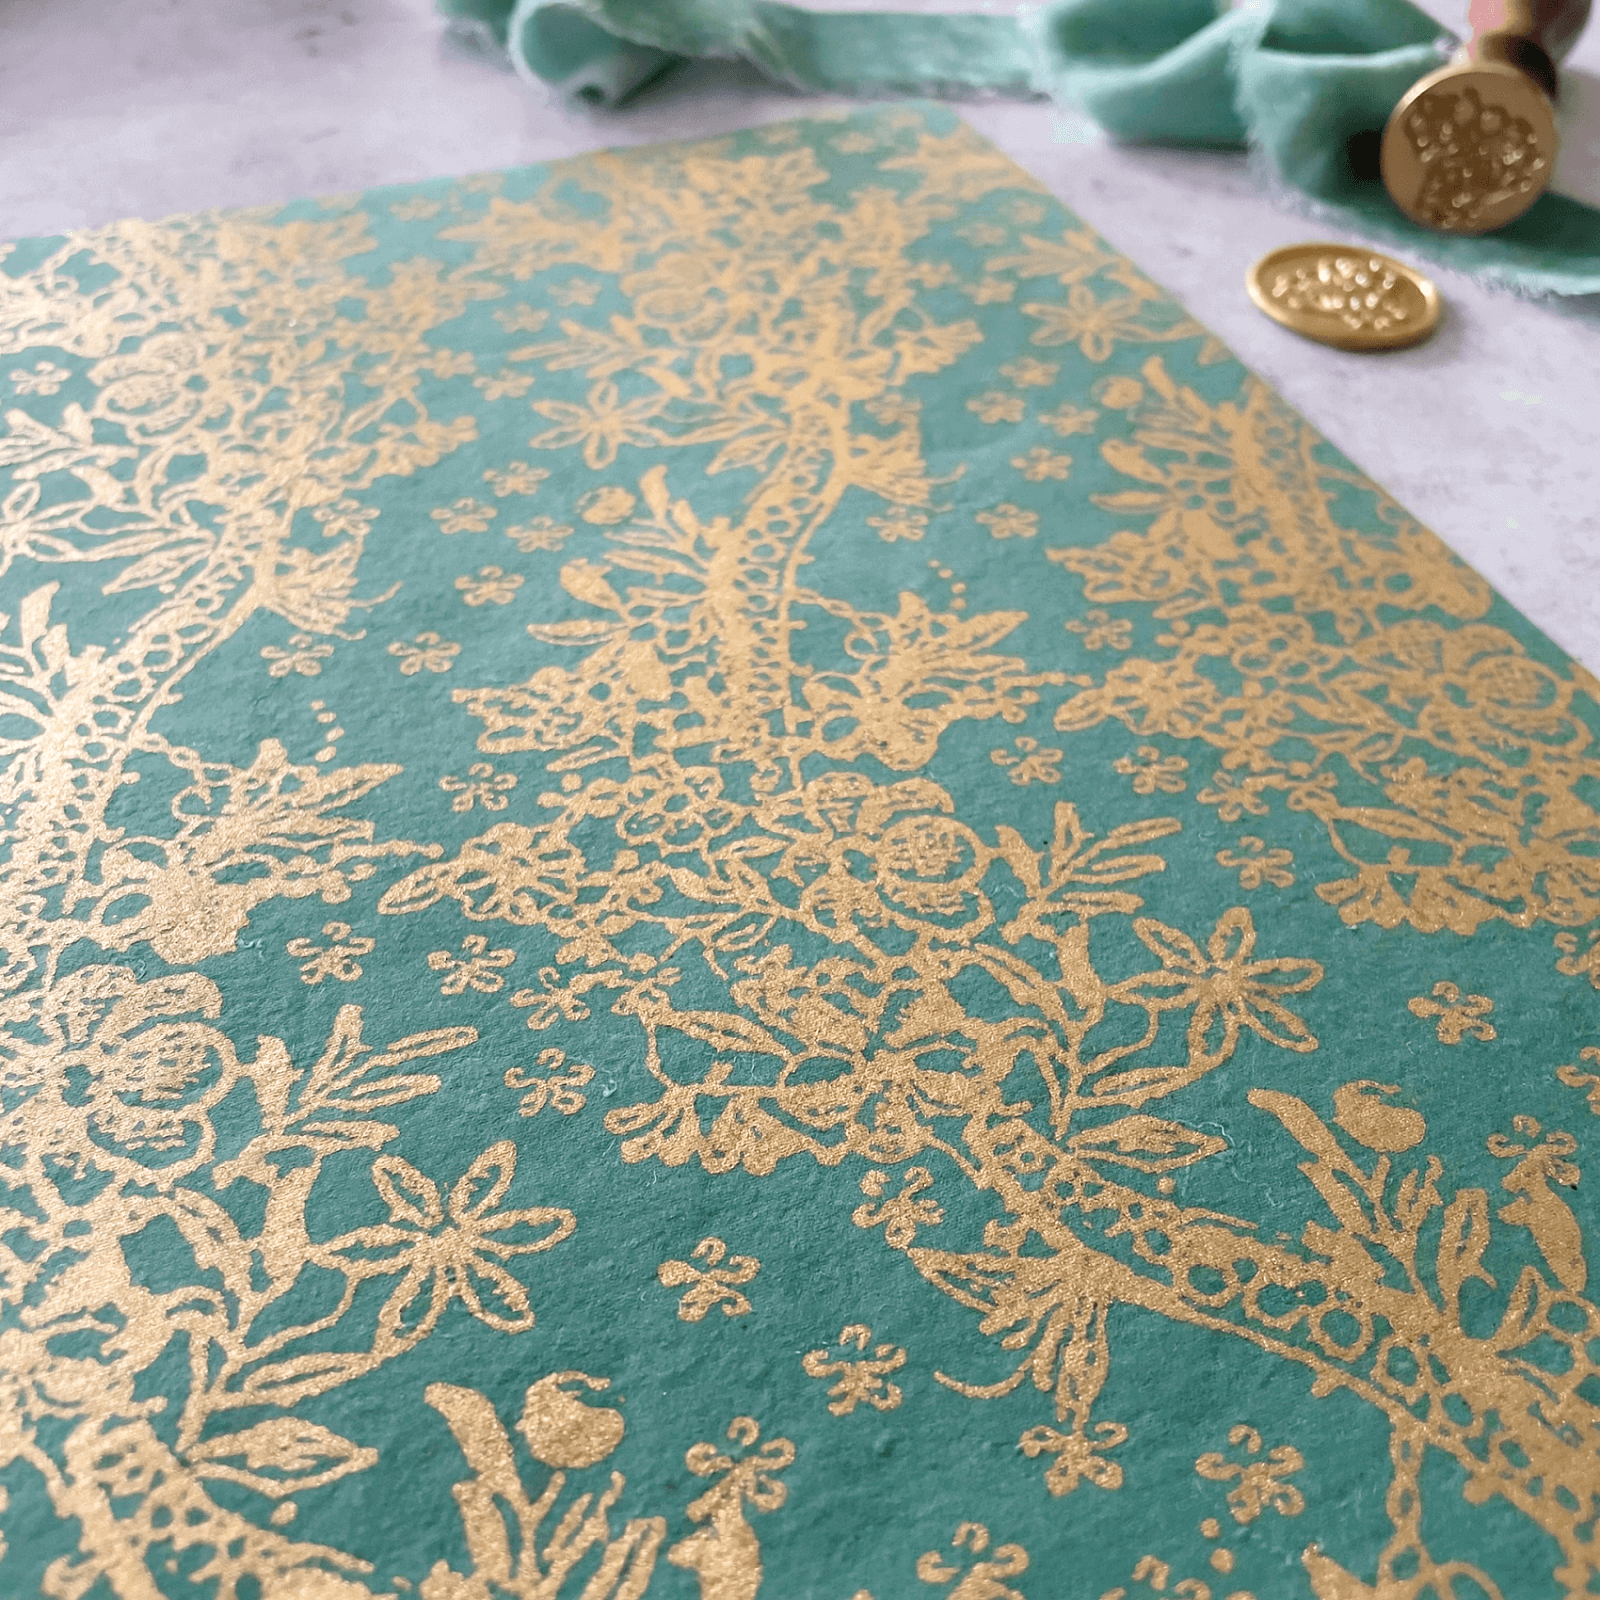 jade-green-and-gold-recycled-paper